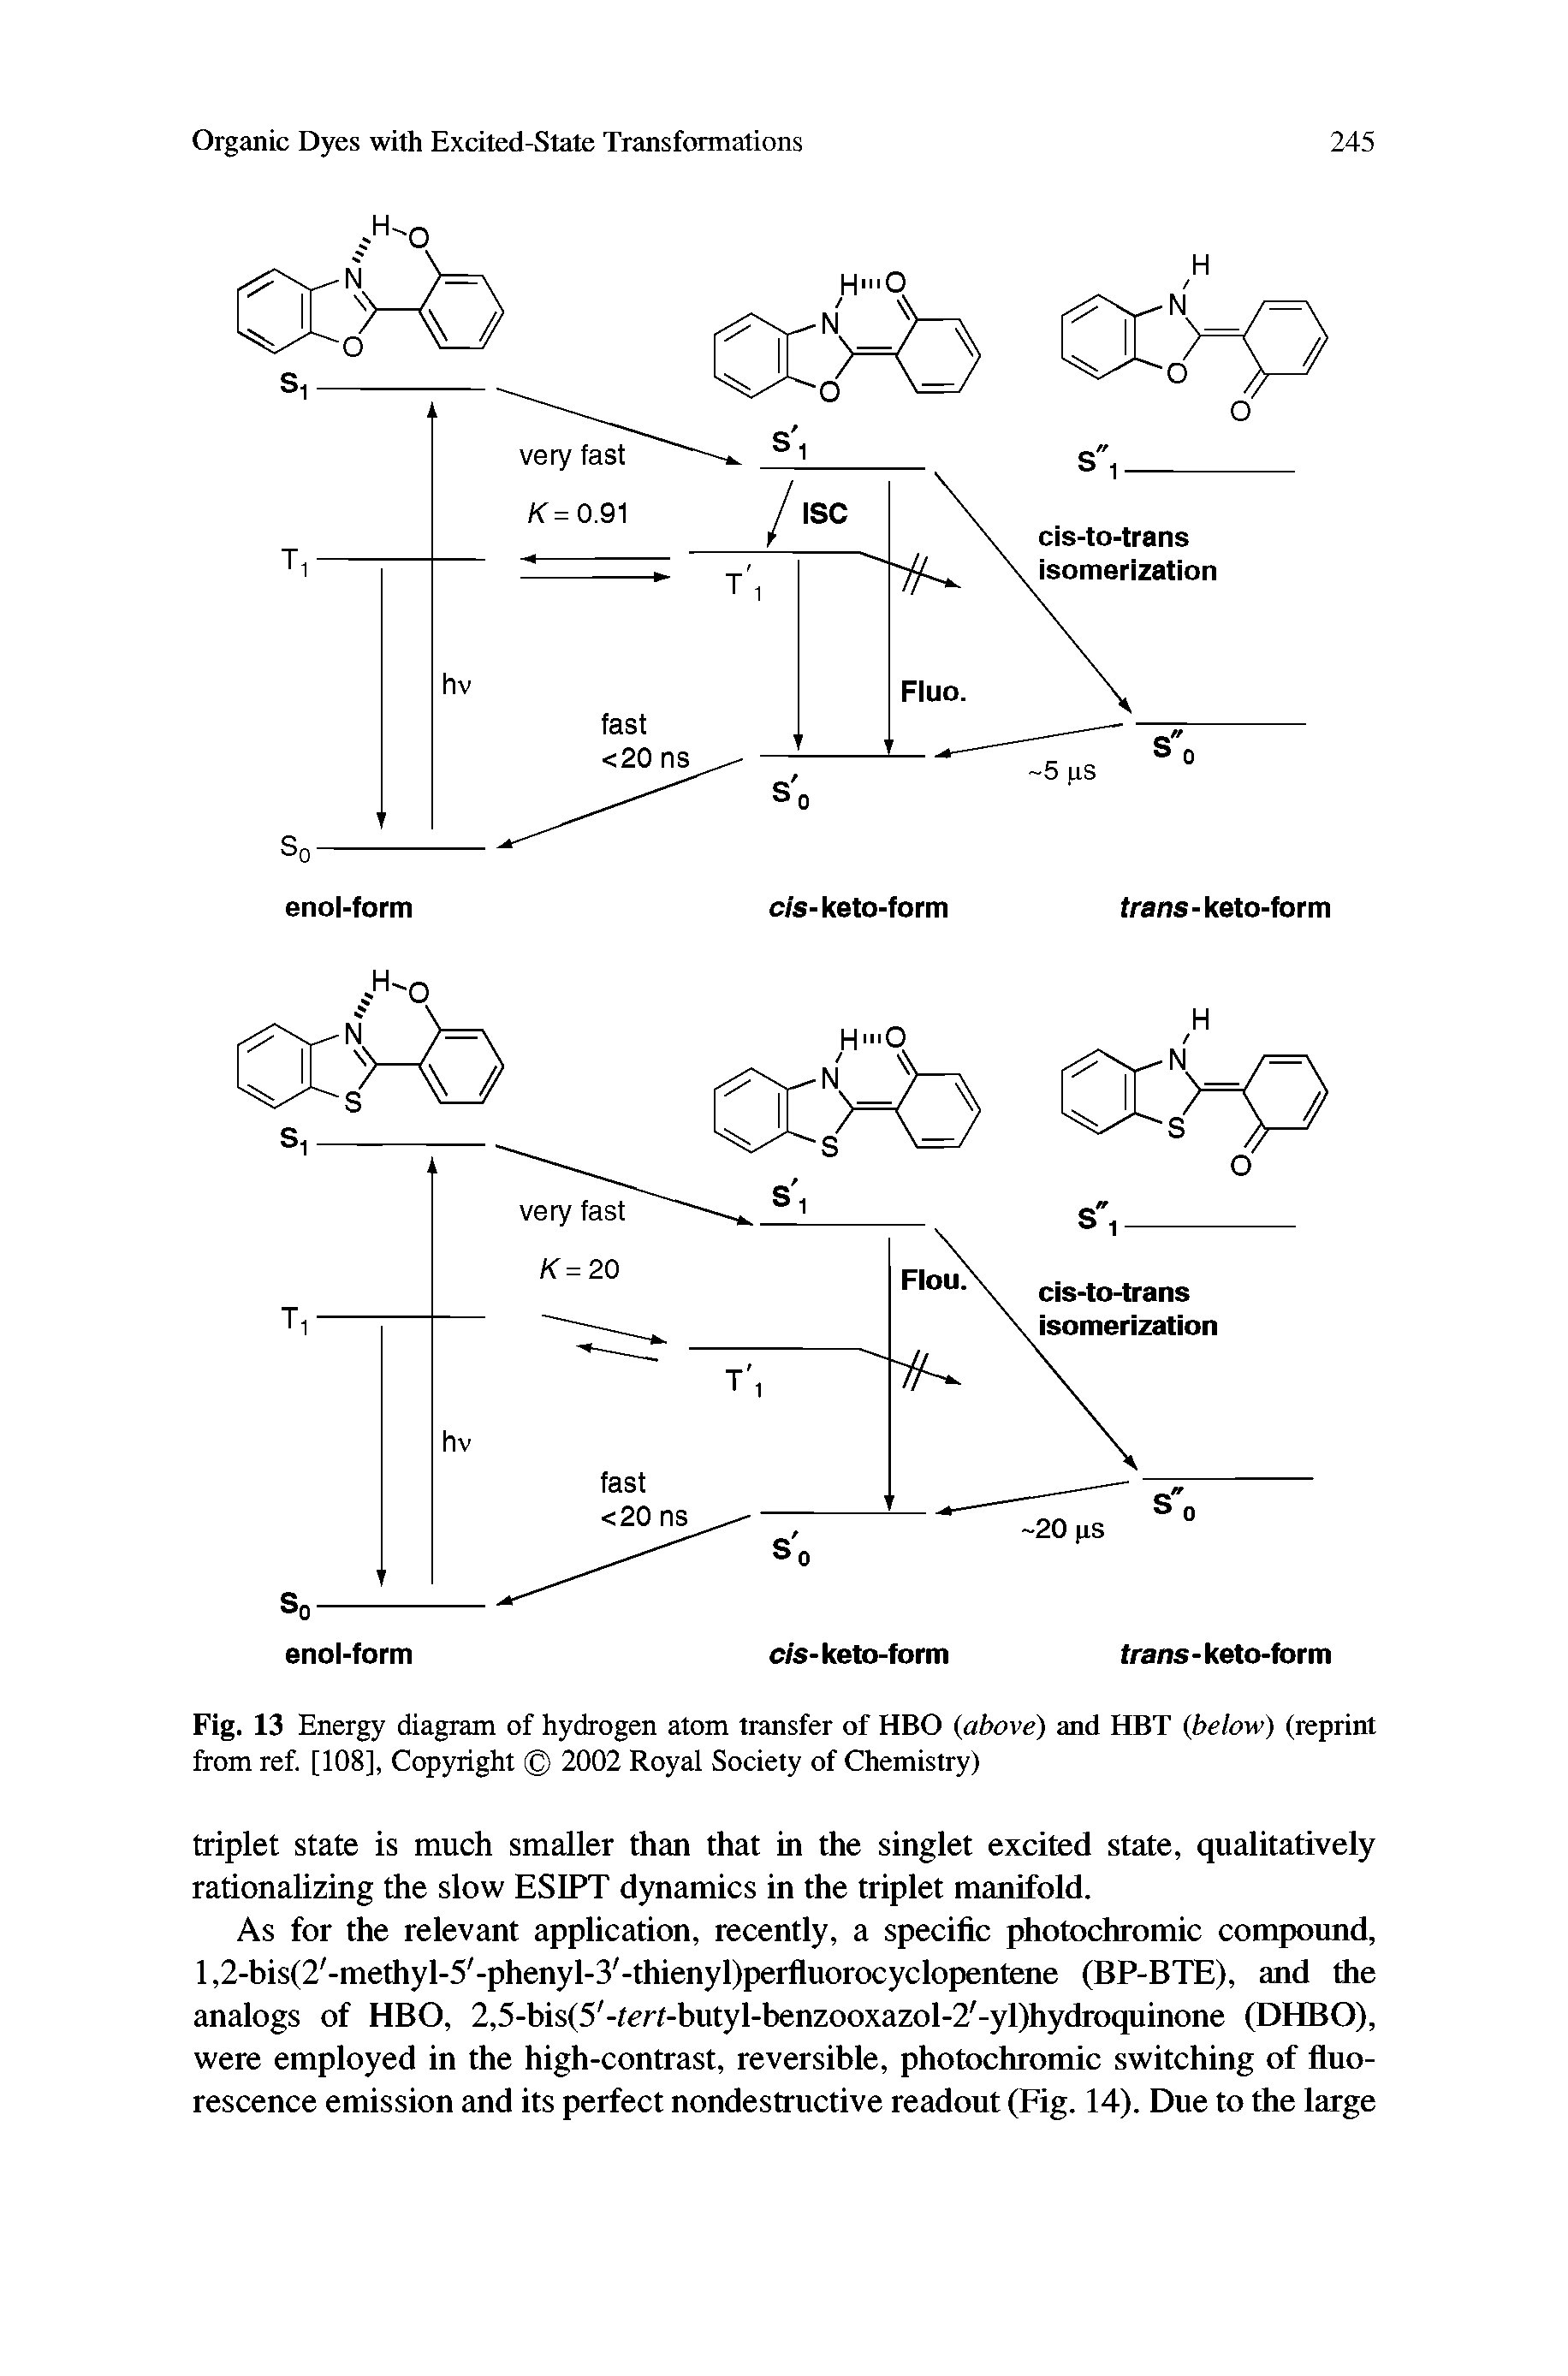 Fig. 13 Energy diagram of hydrogen atom transfer of HBO (above) and HBT (below) (reprint from ref. [108], Copyright 2002 Royal Society of Chemistry)...